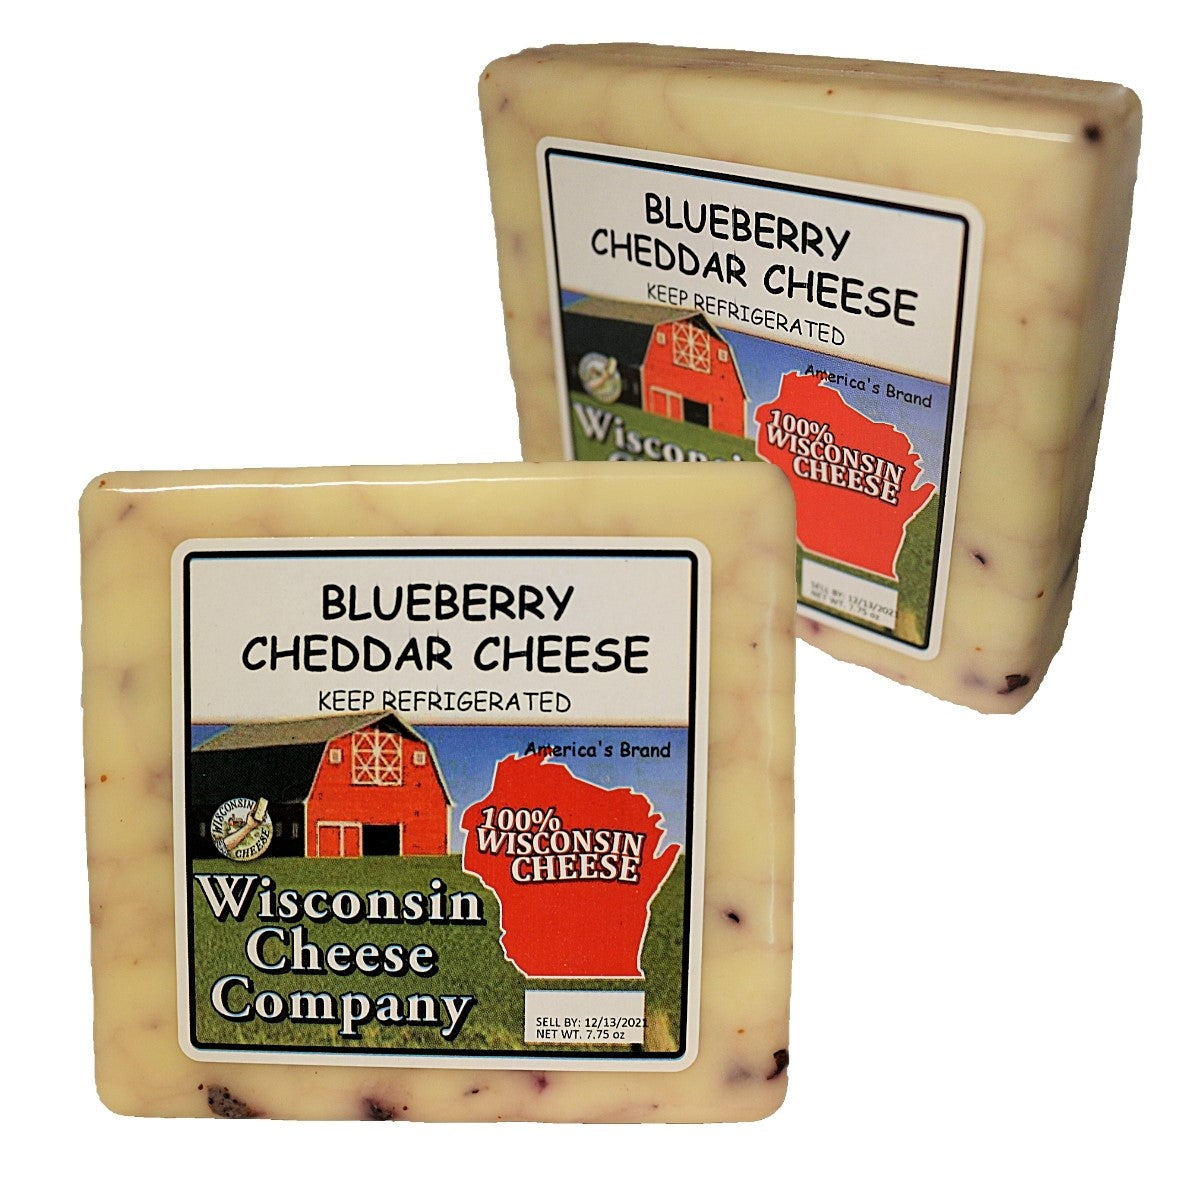 Two blocks of Blueberry Cheddar Cheese